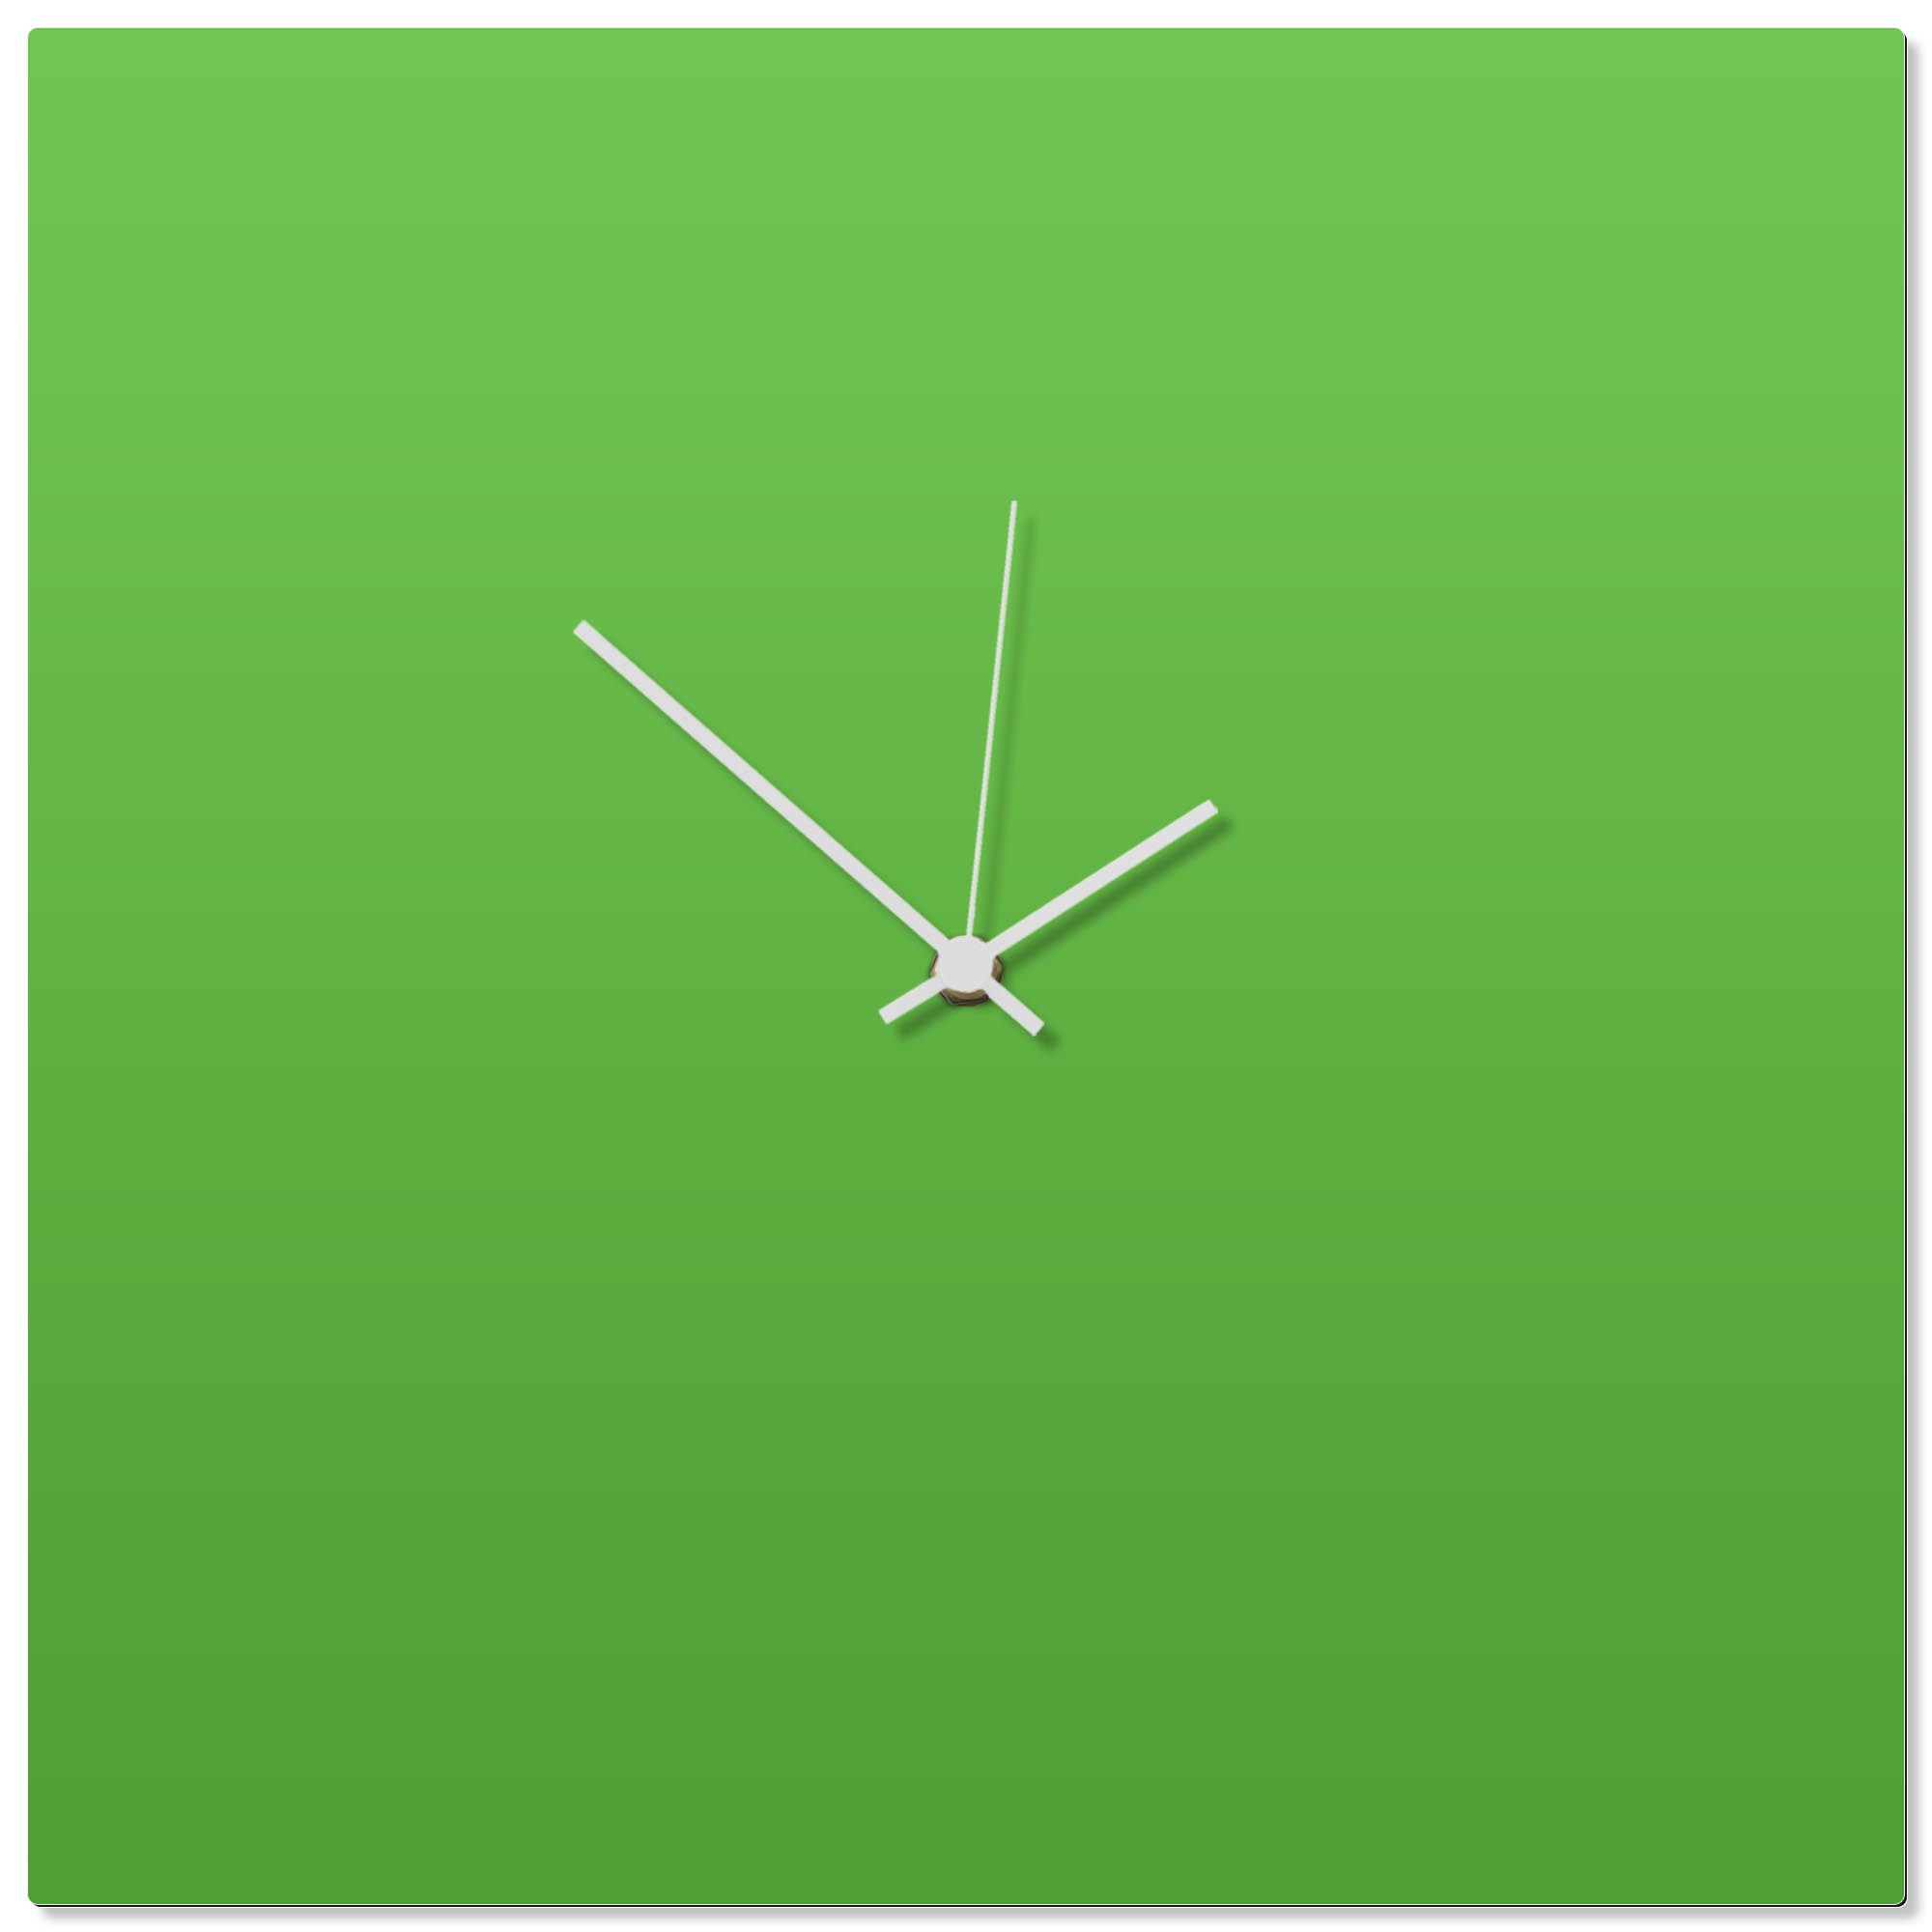 Greenout White Square Clock 16x16in. Aluminum Polymetal